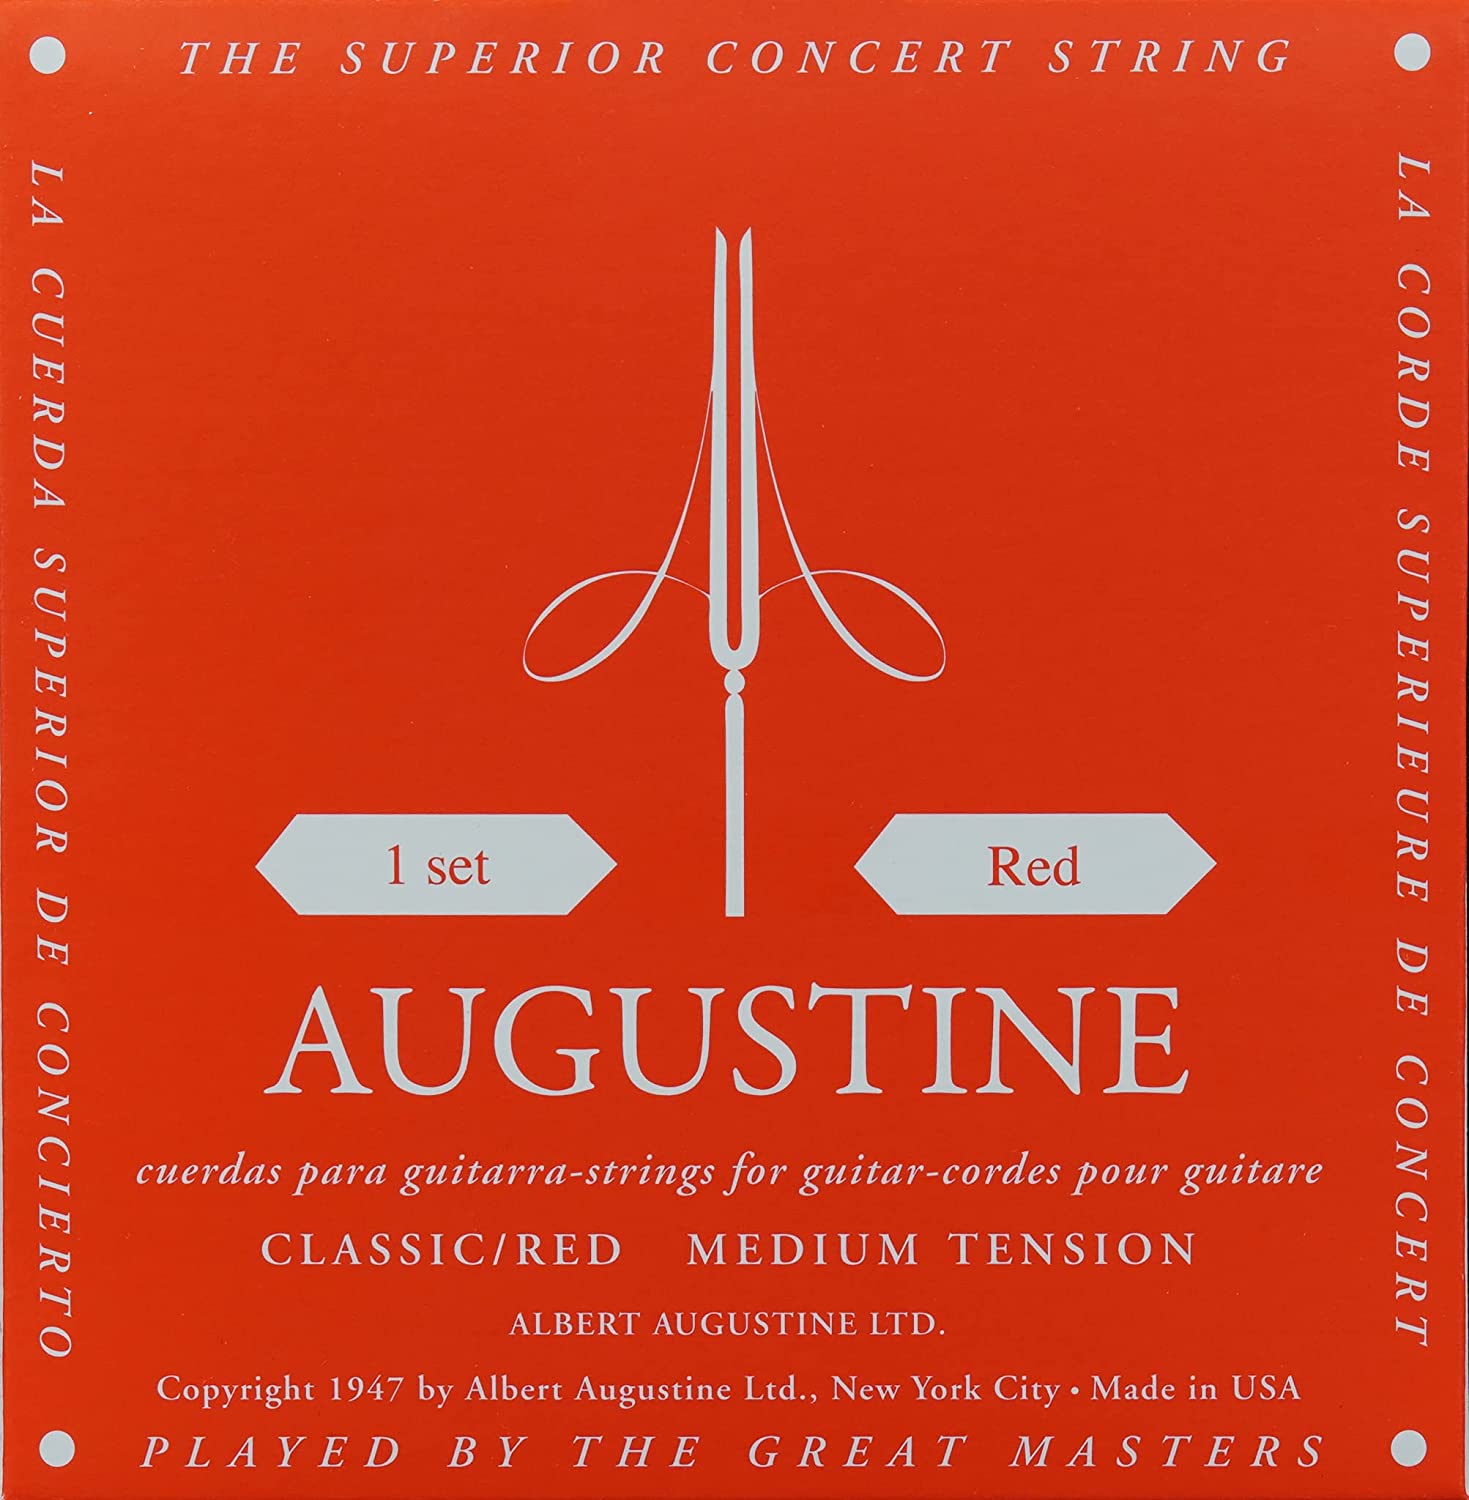 AUGUSTINE CLASSIC/RED